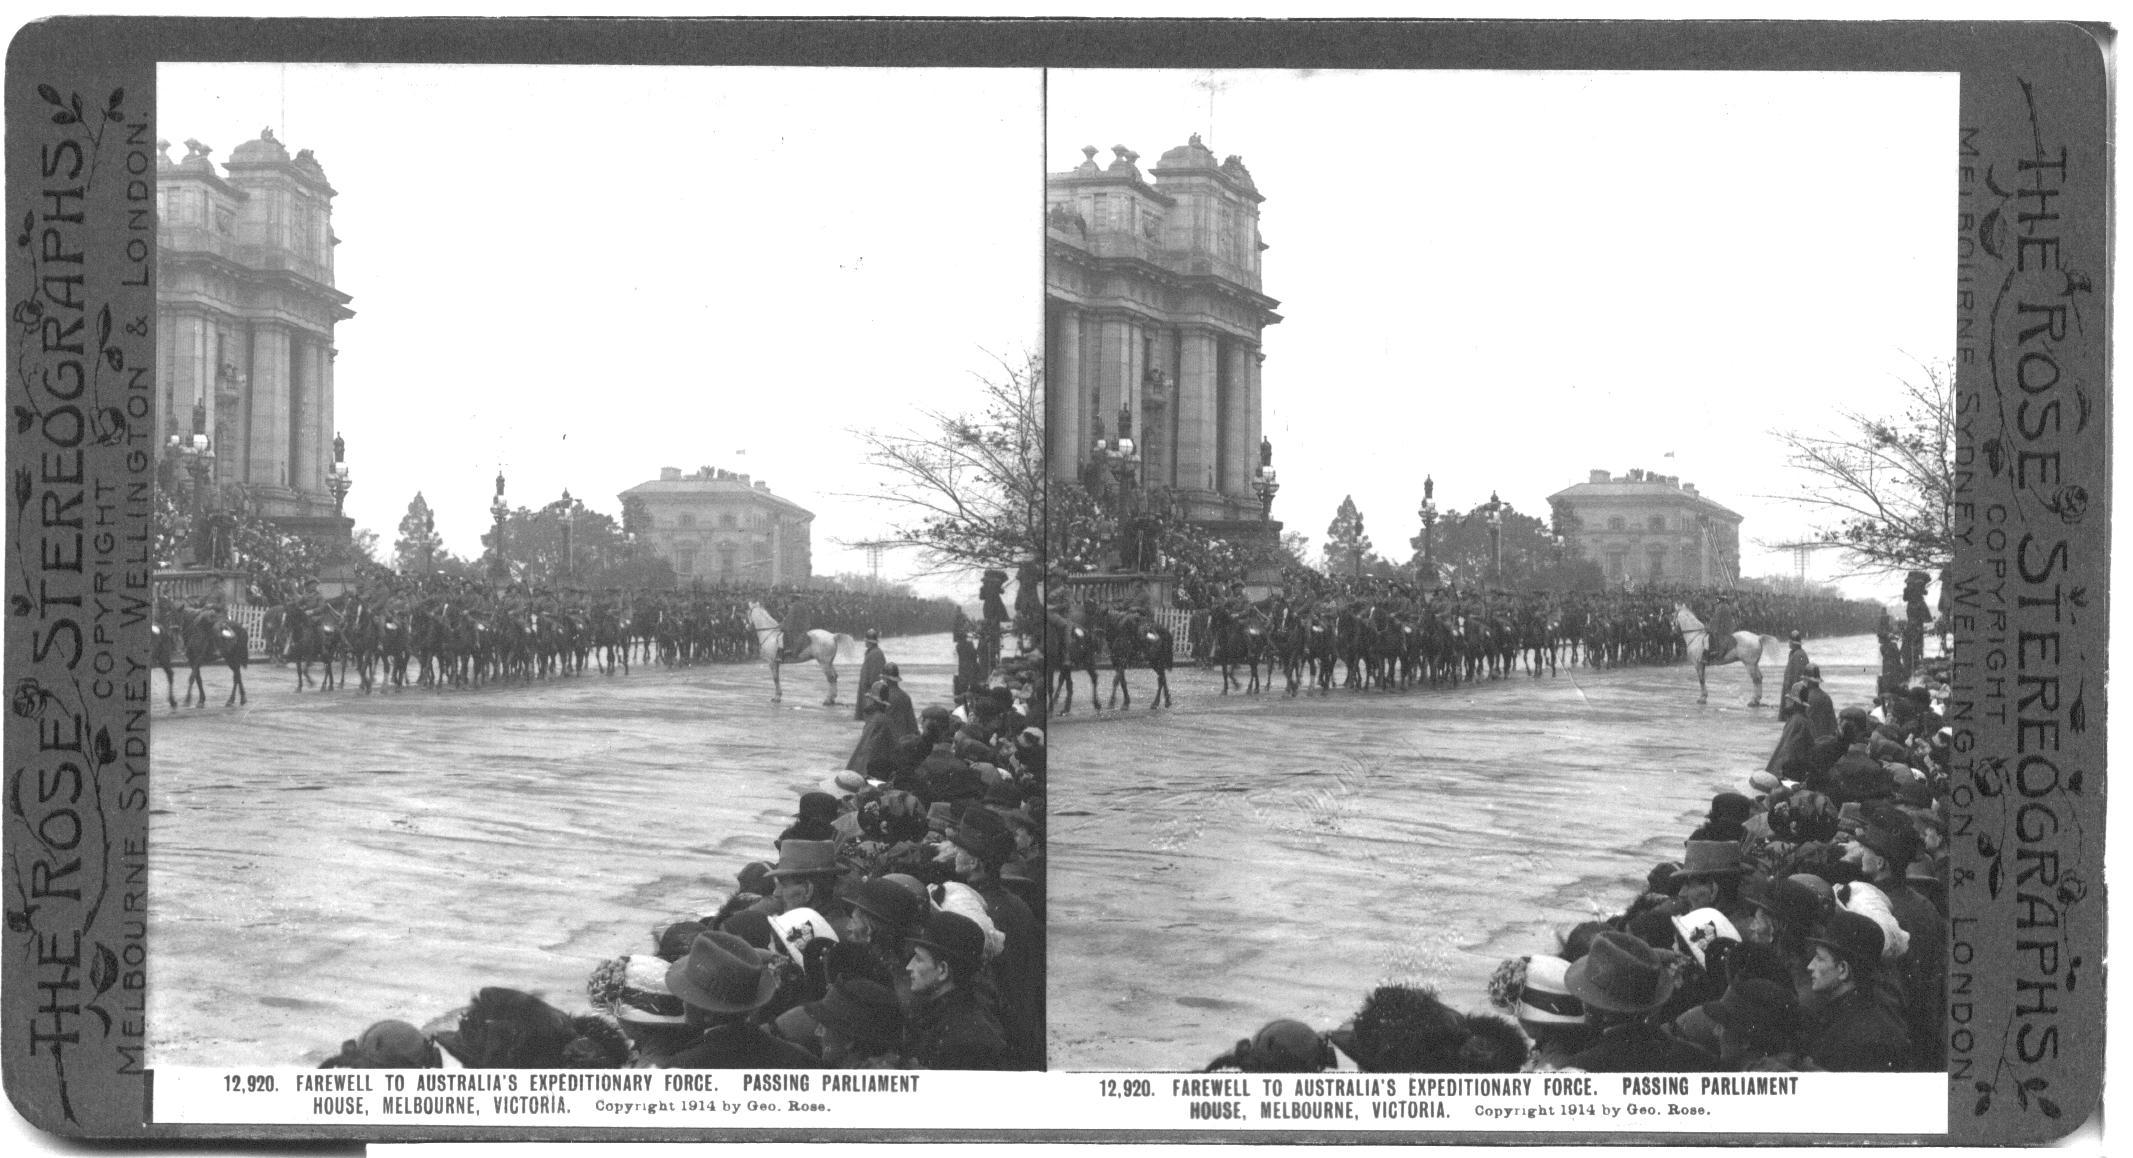 FAREWELL TO AUSTRALIA’S EXPEDITIONARY FORCE. PASSING PARLIAMENT HOUSE, MELBOURNE, VICTORIA.